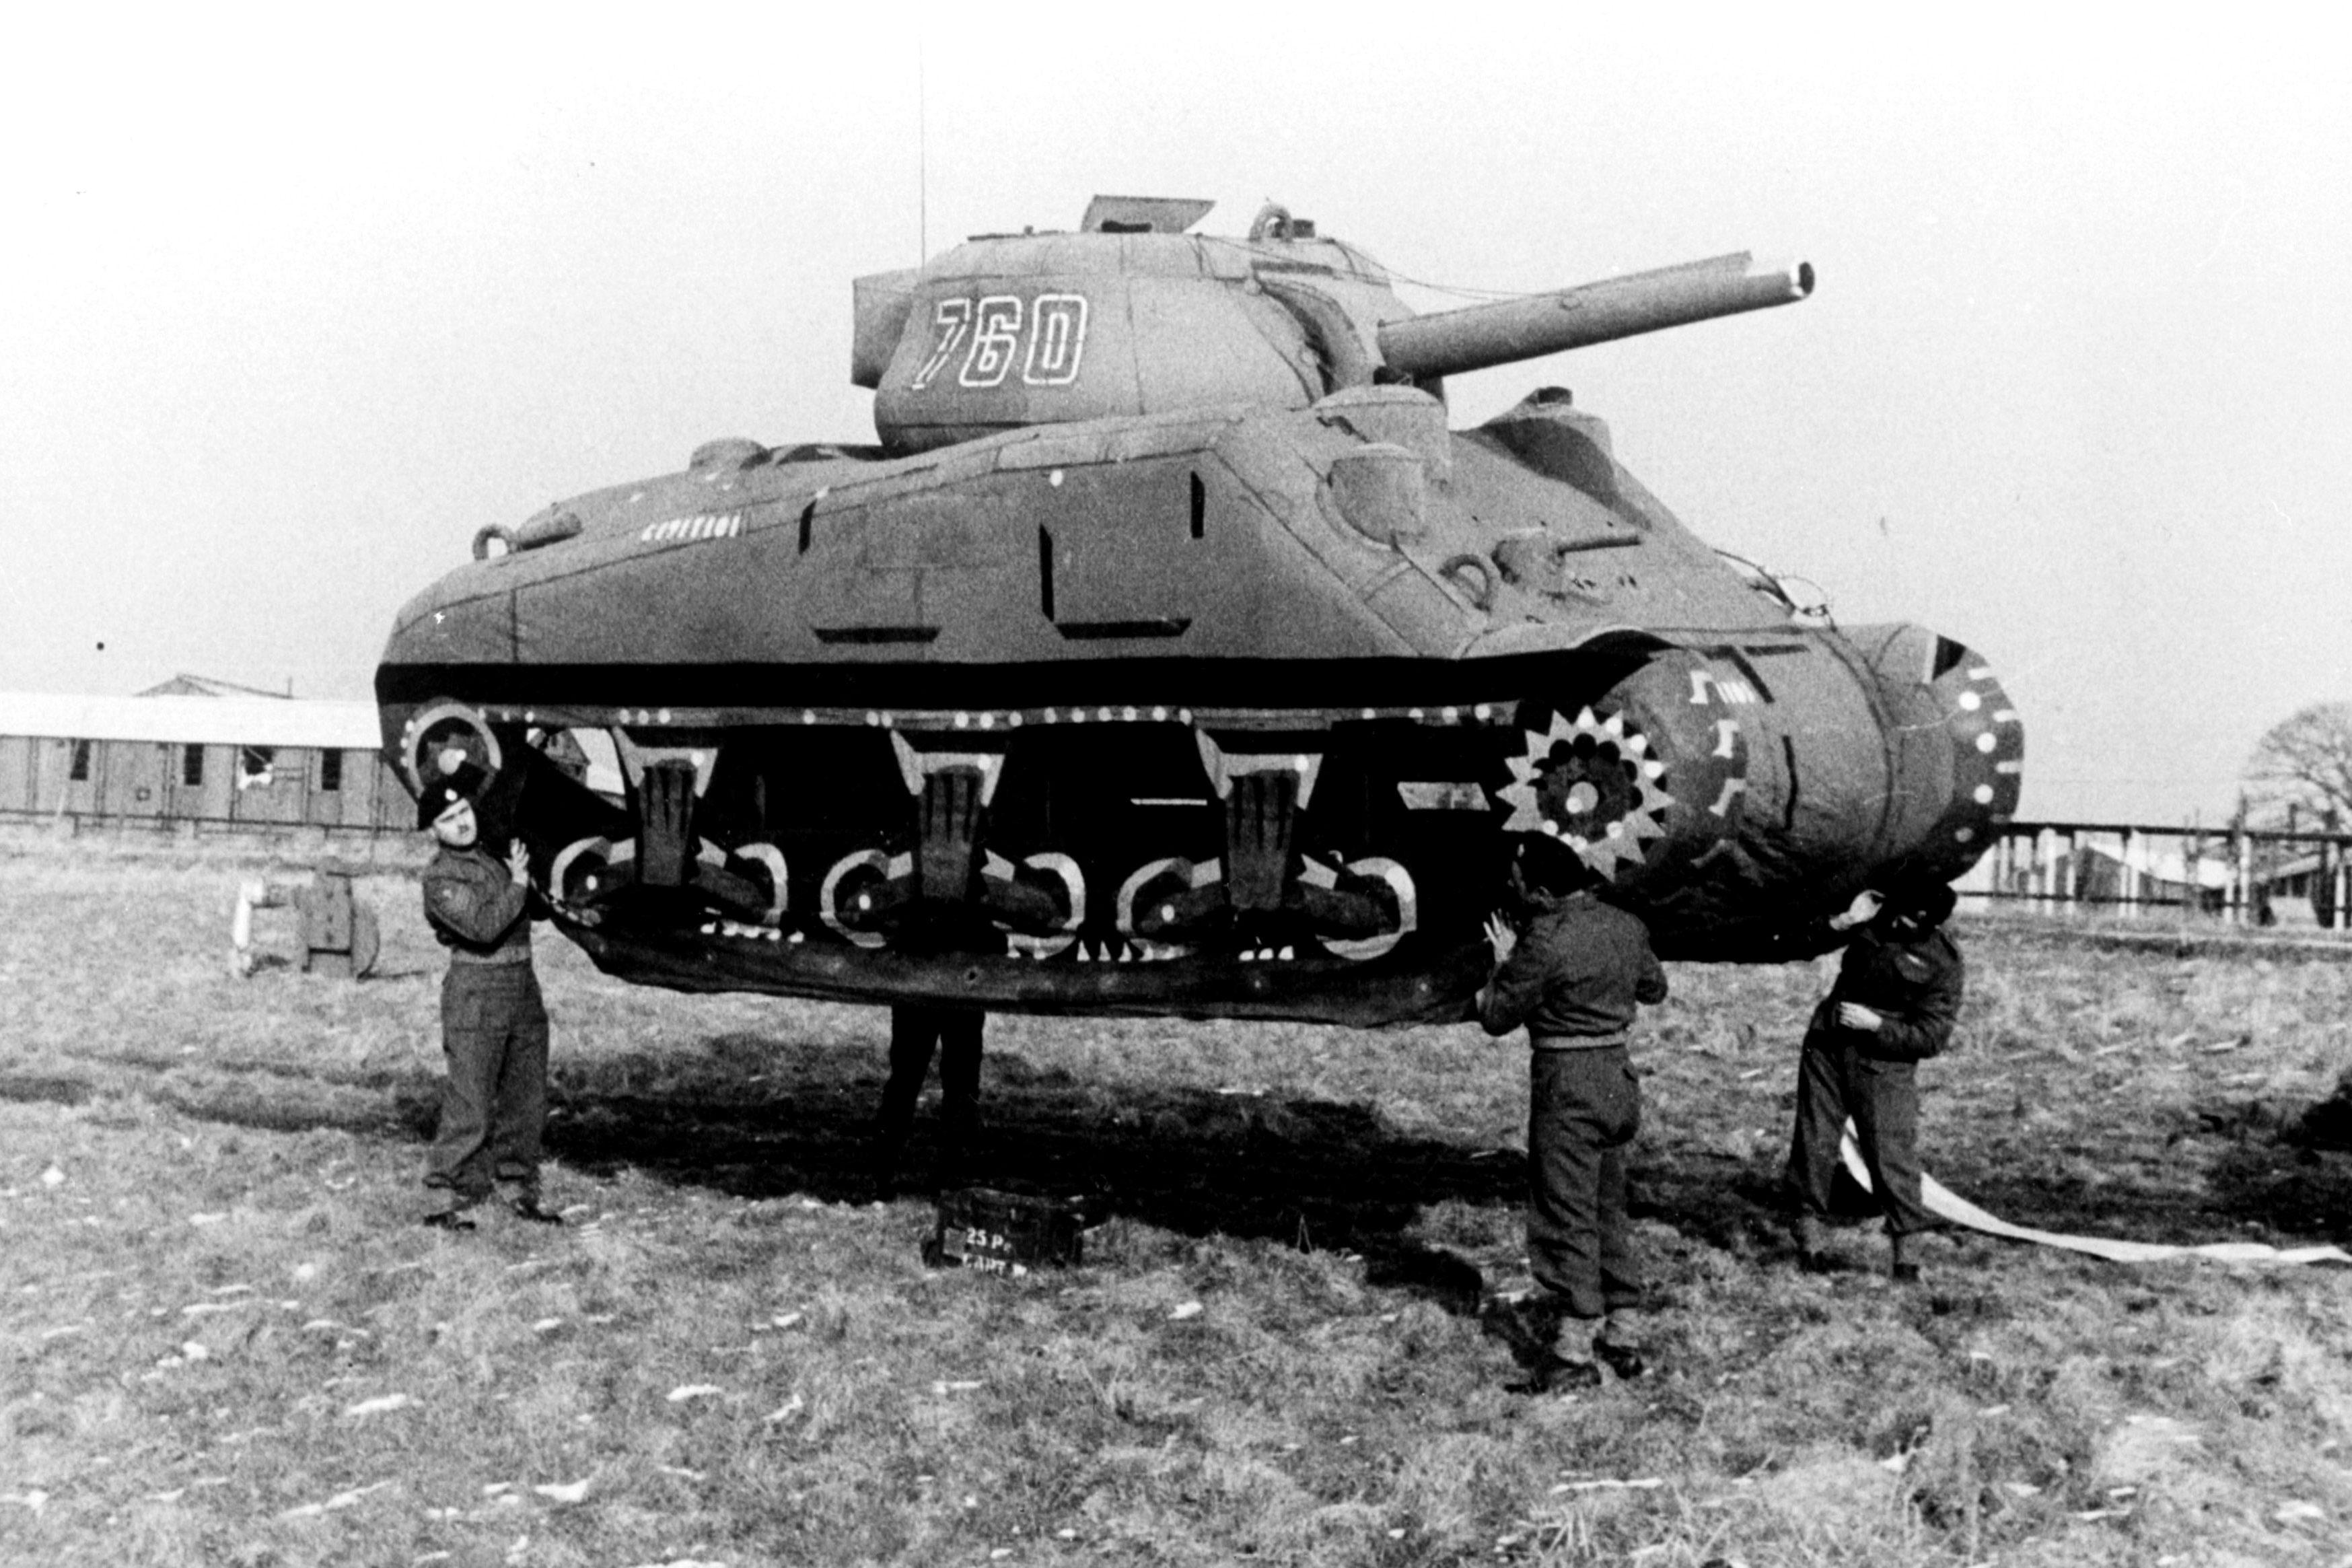 Troops carry a rubber M4 Sherman tank used in the Allied decoy operations